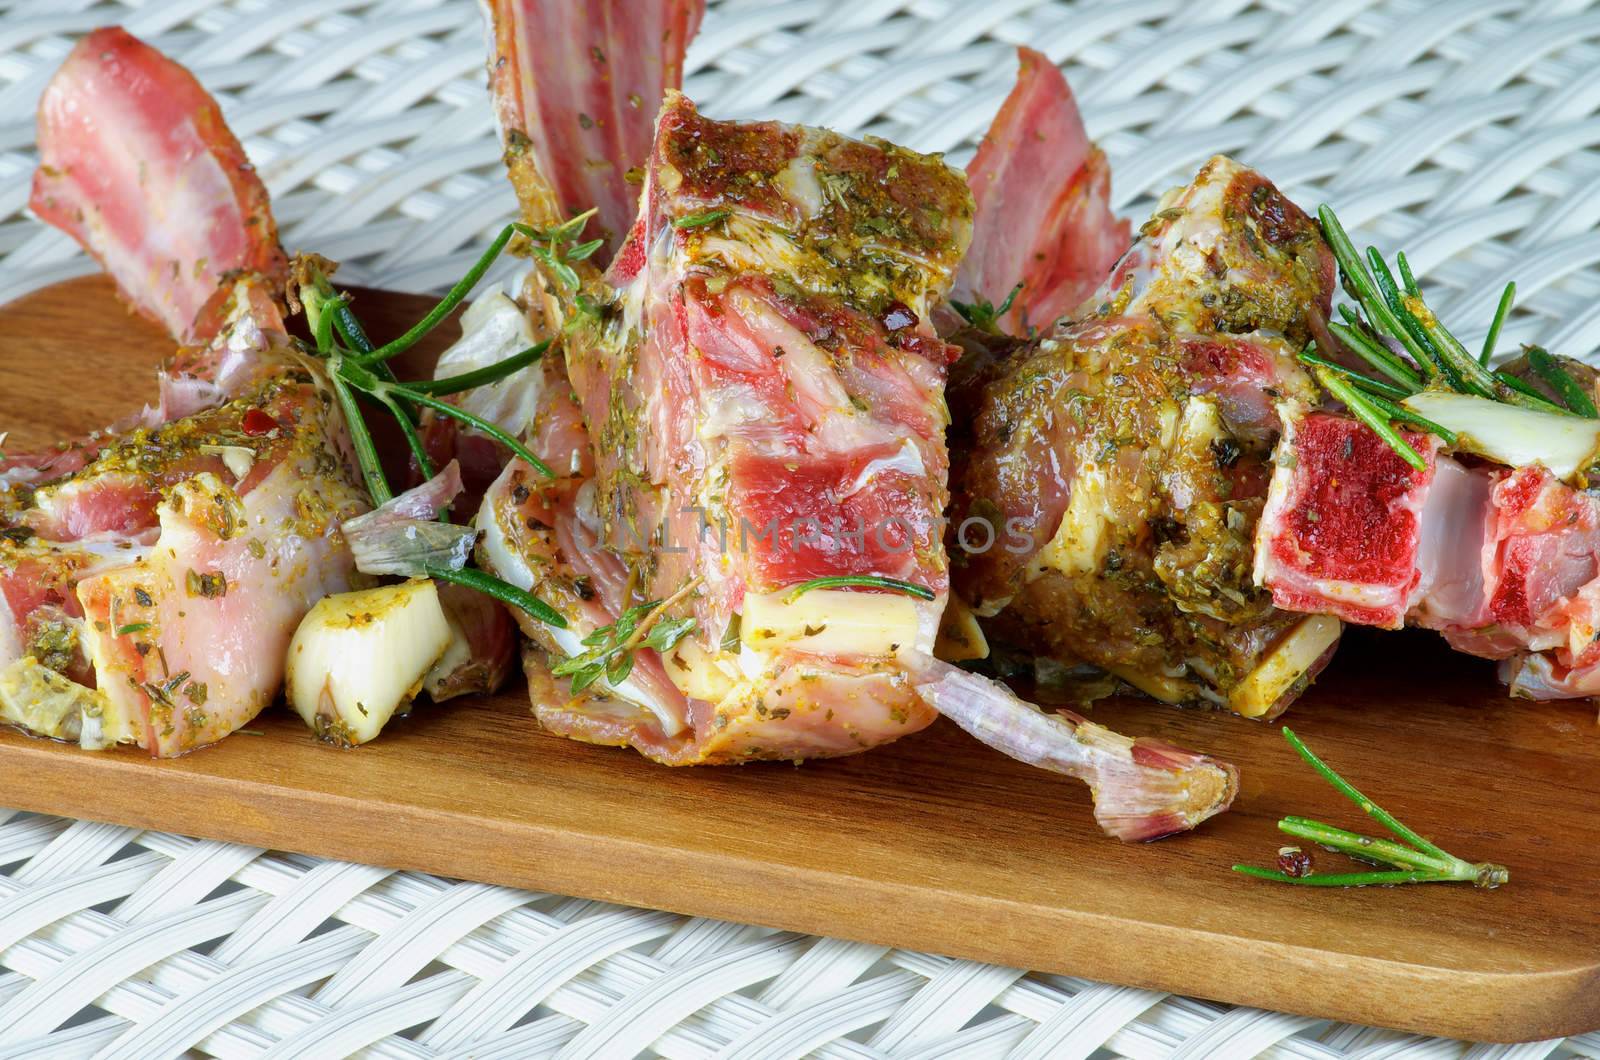 Delicious Raw Lamb Ribs in Marinade of Herbs and Spices with Rosemary and Garlic Ready to Roast closeup on Wooden Cutting Board